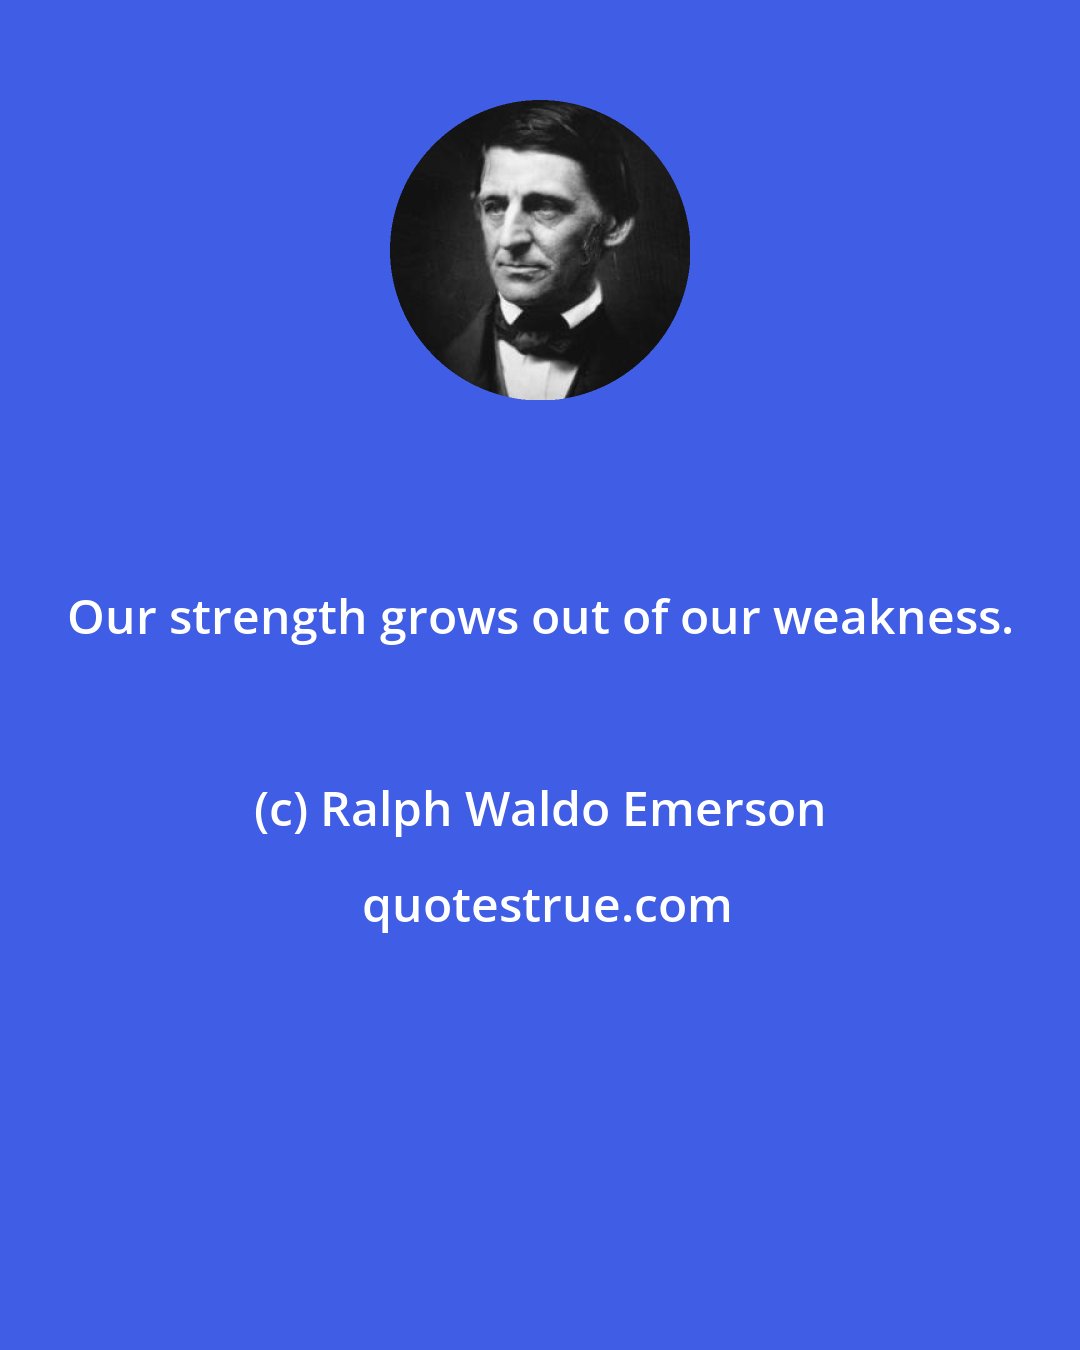 Ralph Waldo Emerson: Our strength grows out of our weakness.